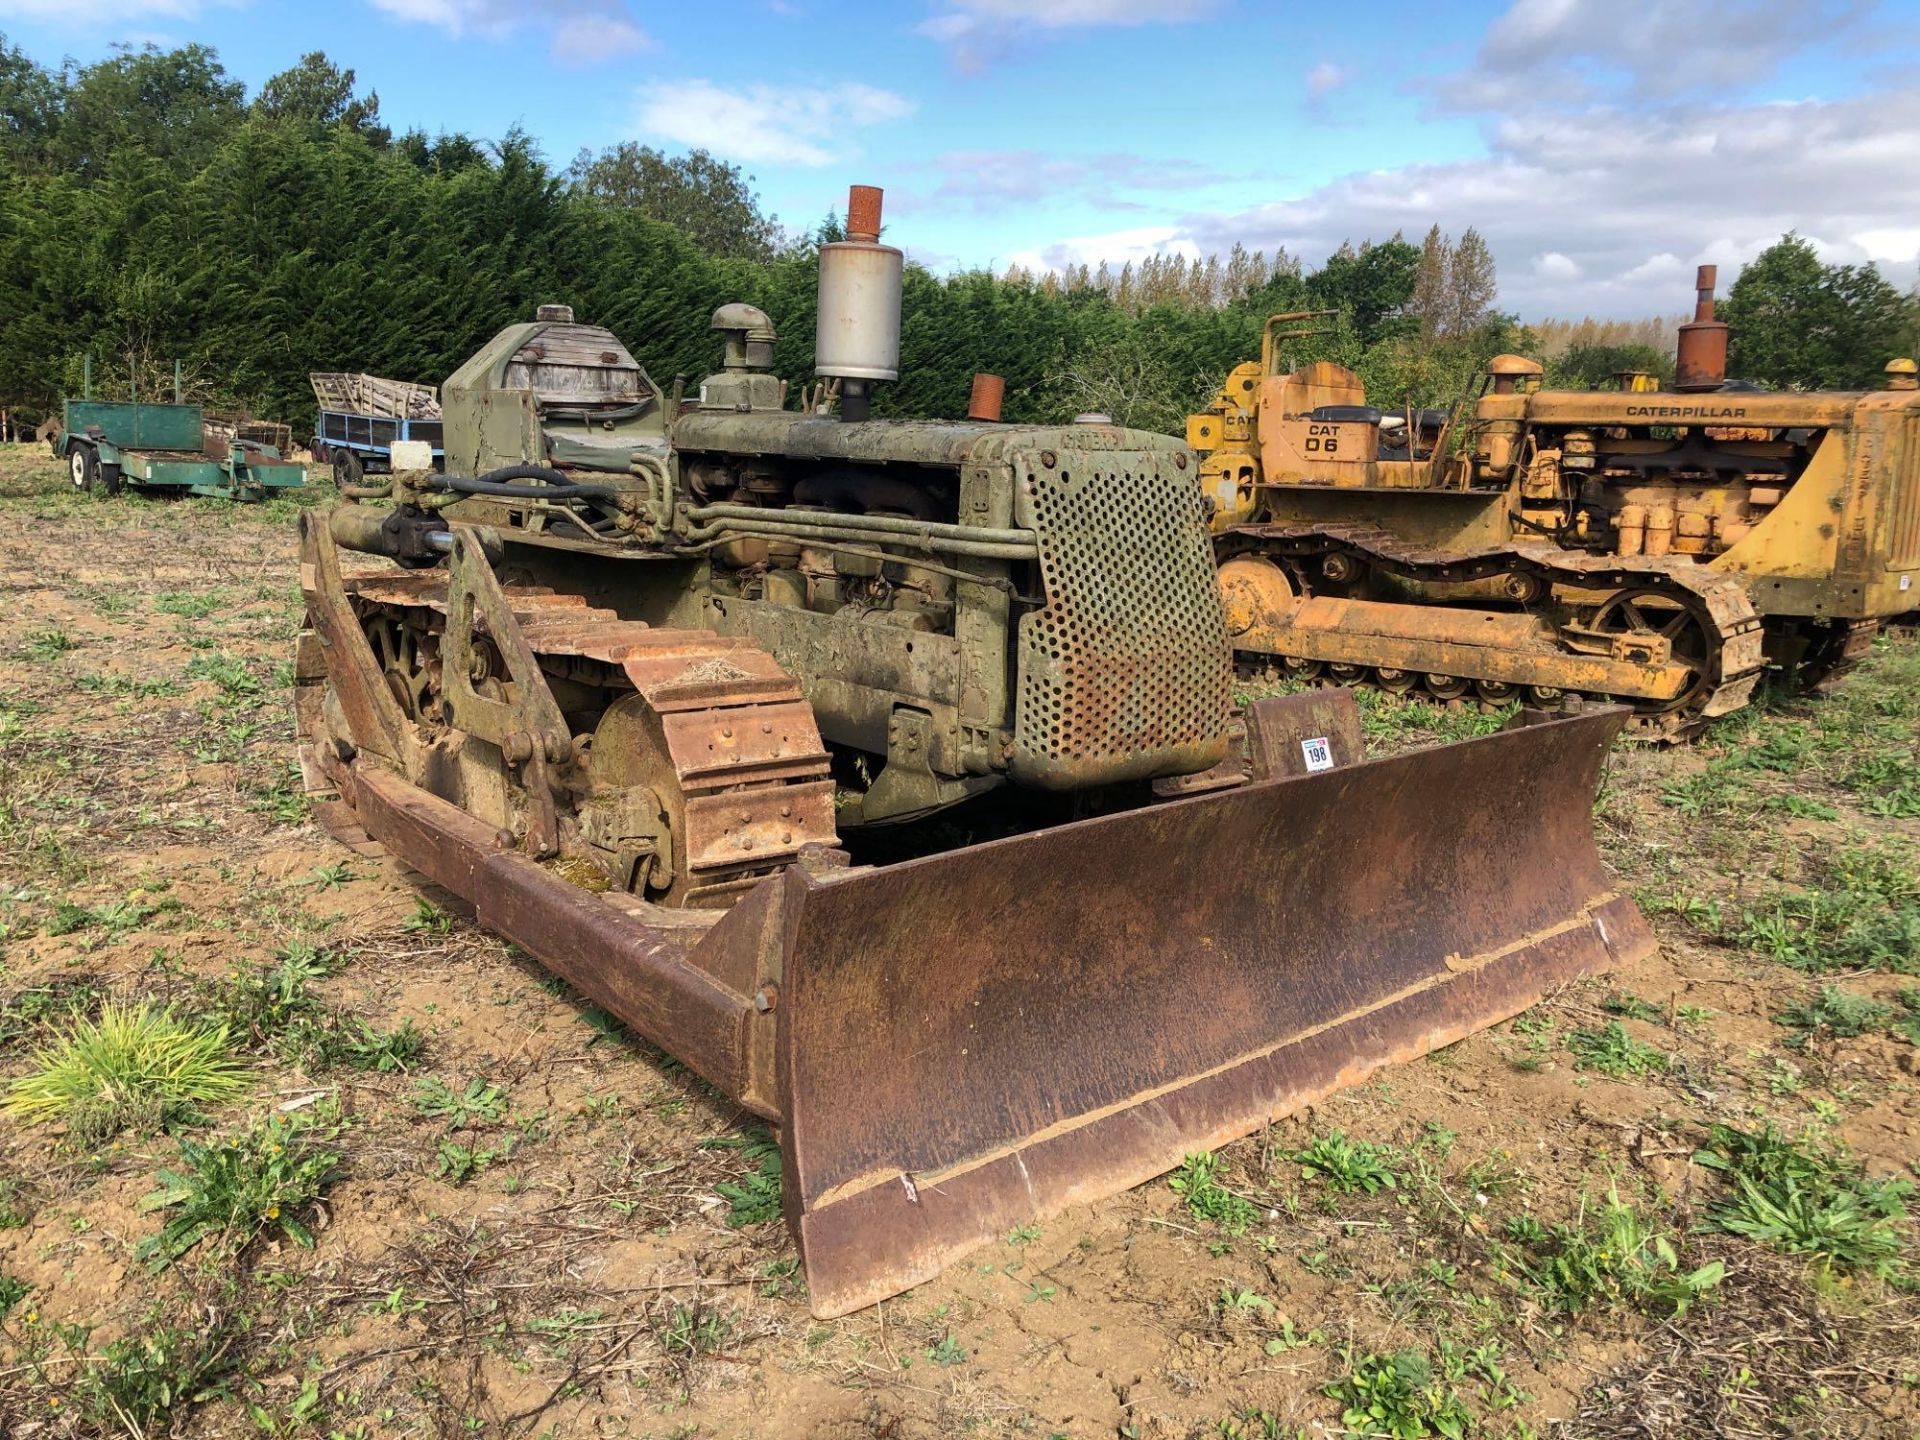 1948 Caterpillar D4 metal tracked crawler with 16" tracks, swinging drawbar, front grading blade and